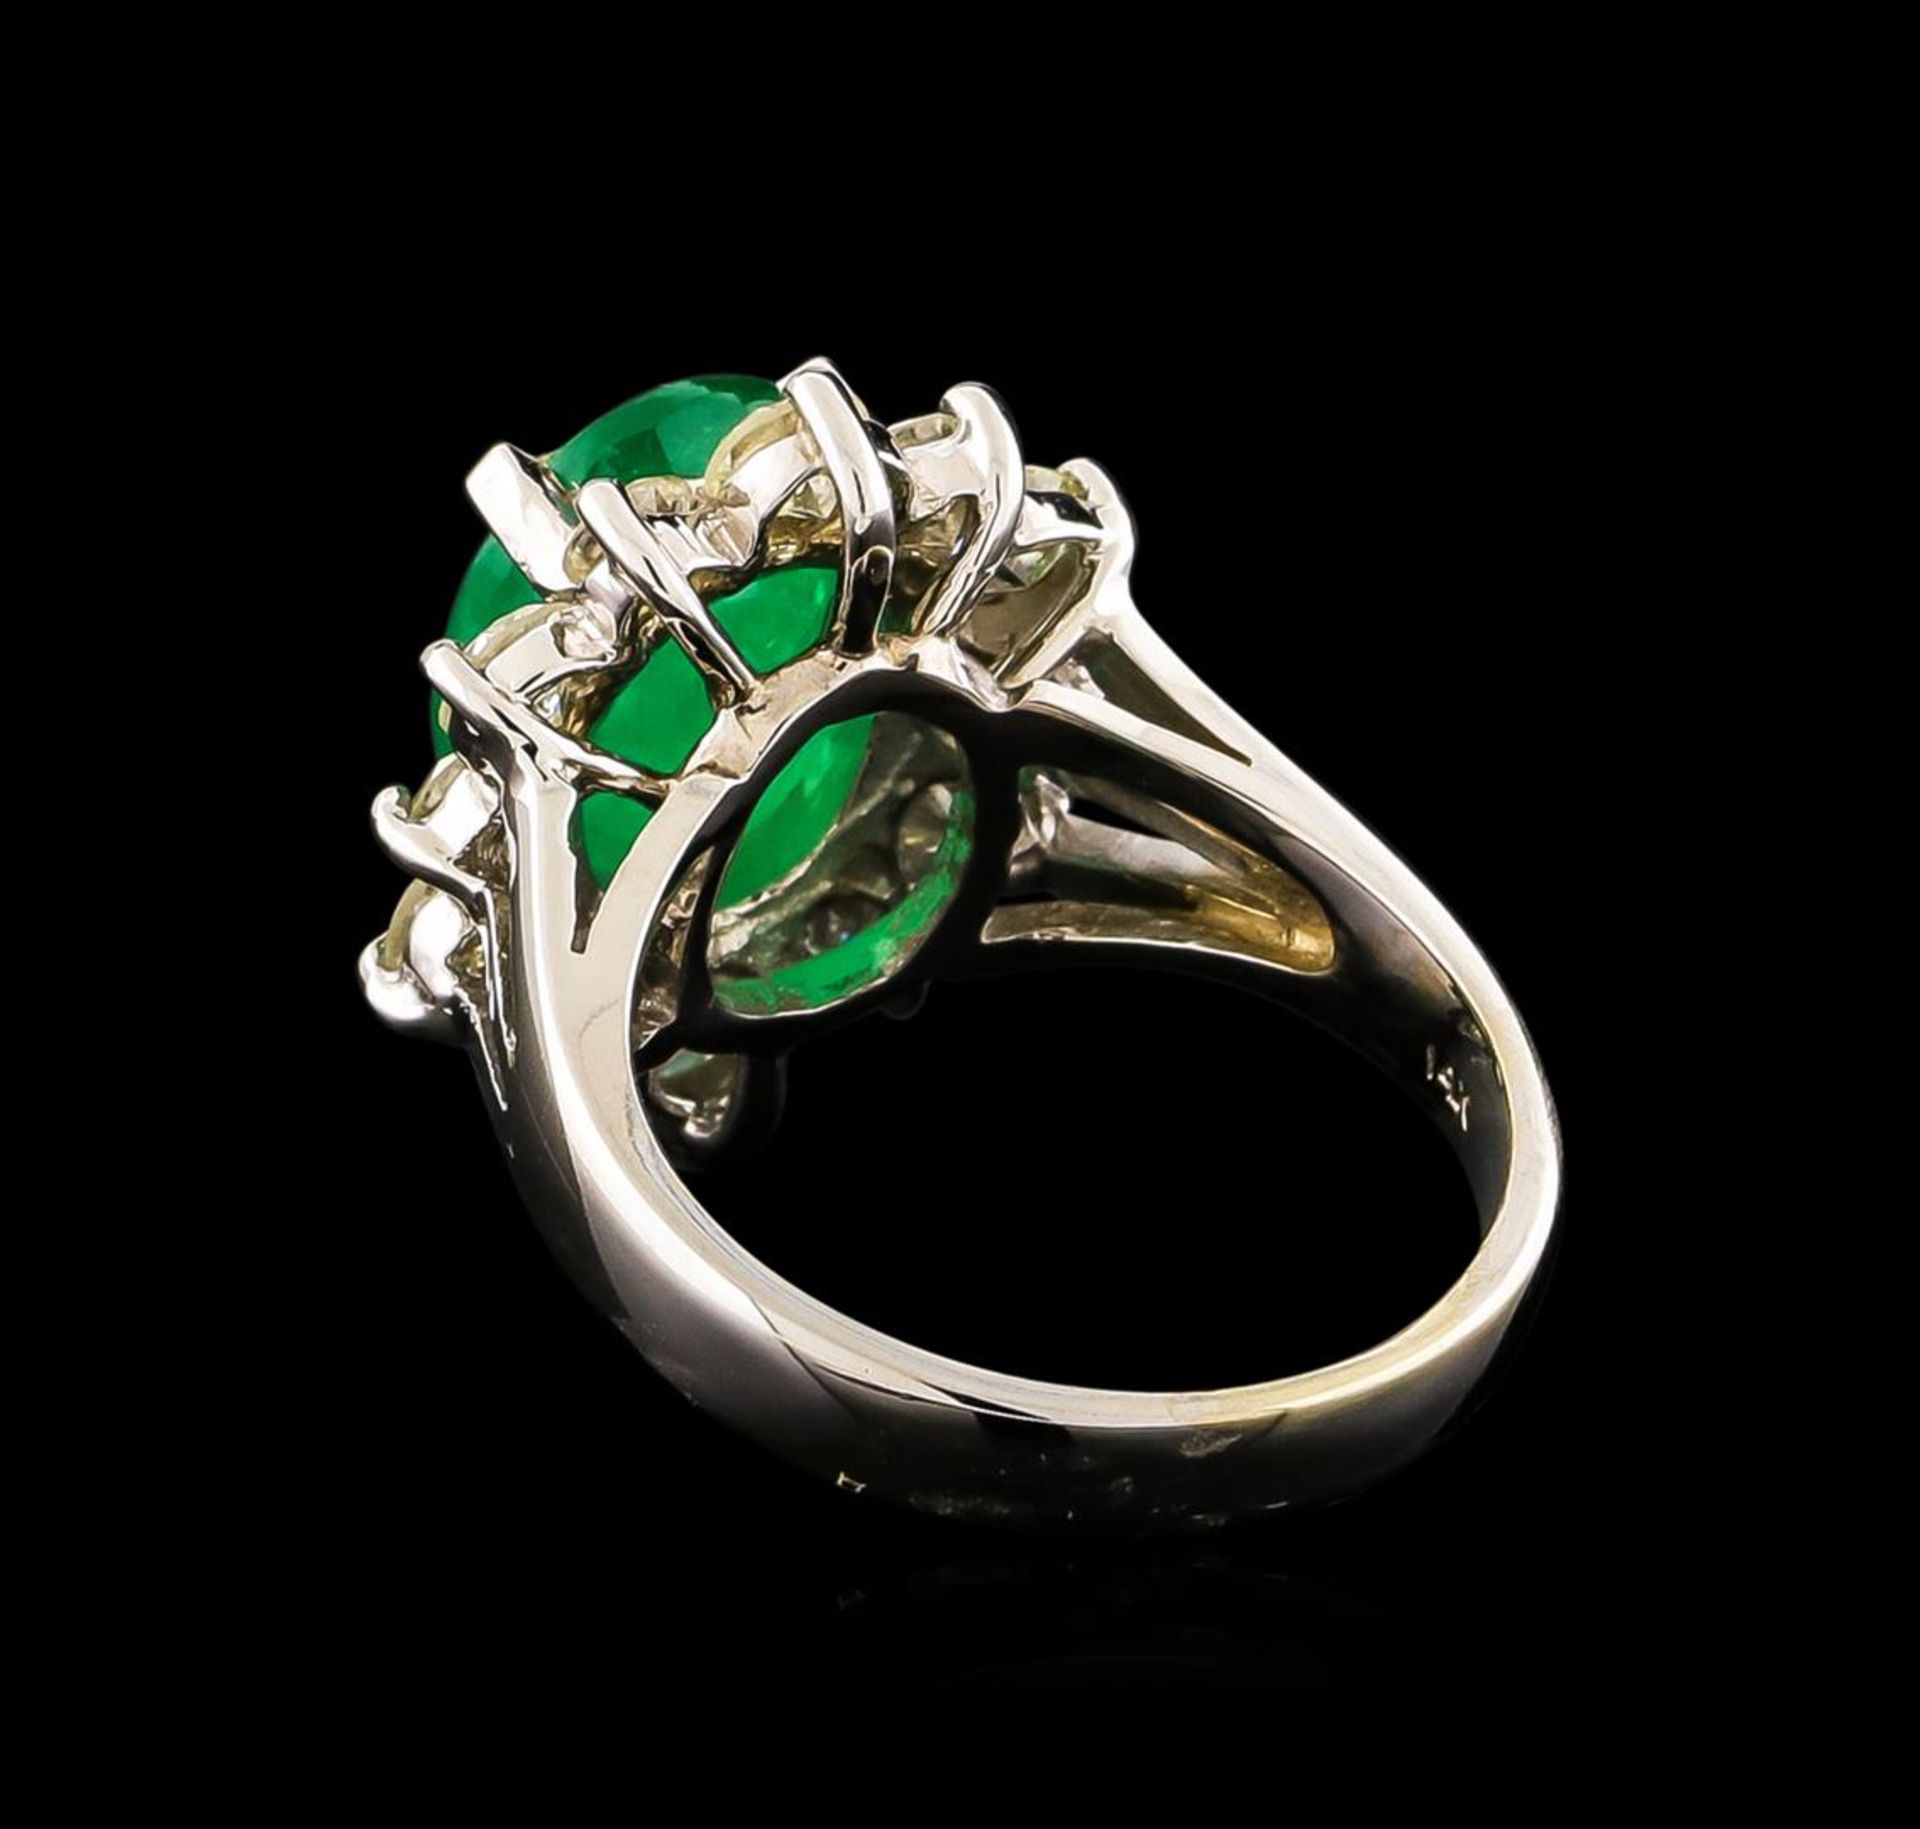 14KT White Gold 3.41 ctw Emerald and Diamond Ring - Image 3 of 5